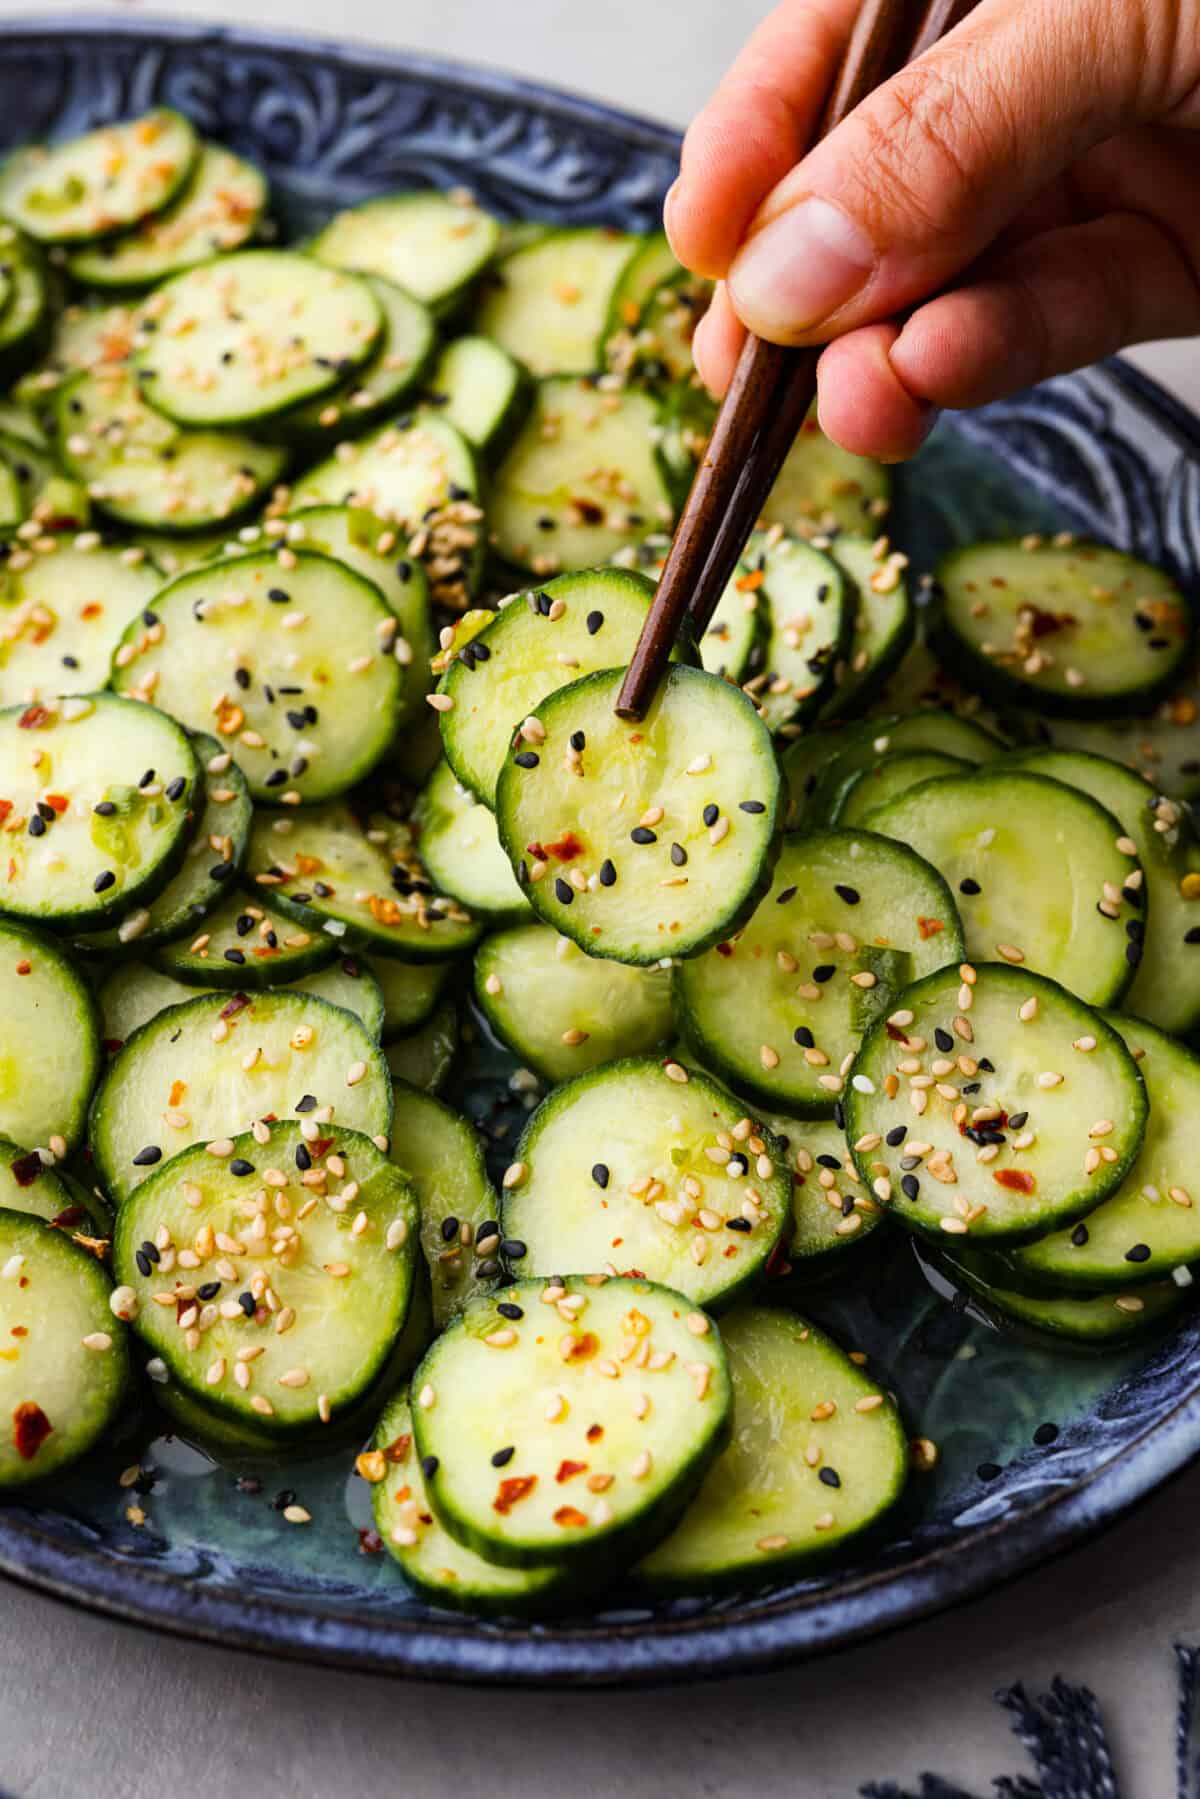 A pair of chopsticks lifting a slice of cucumber out of the bowl. 